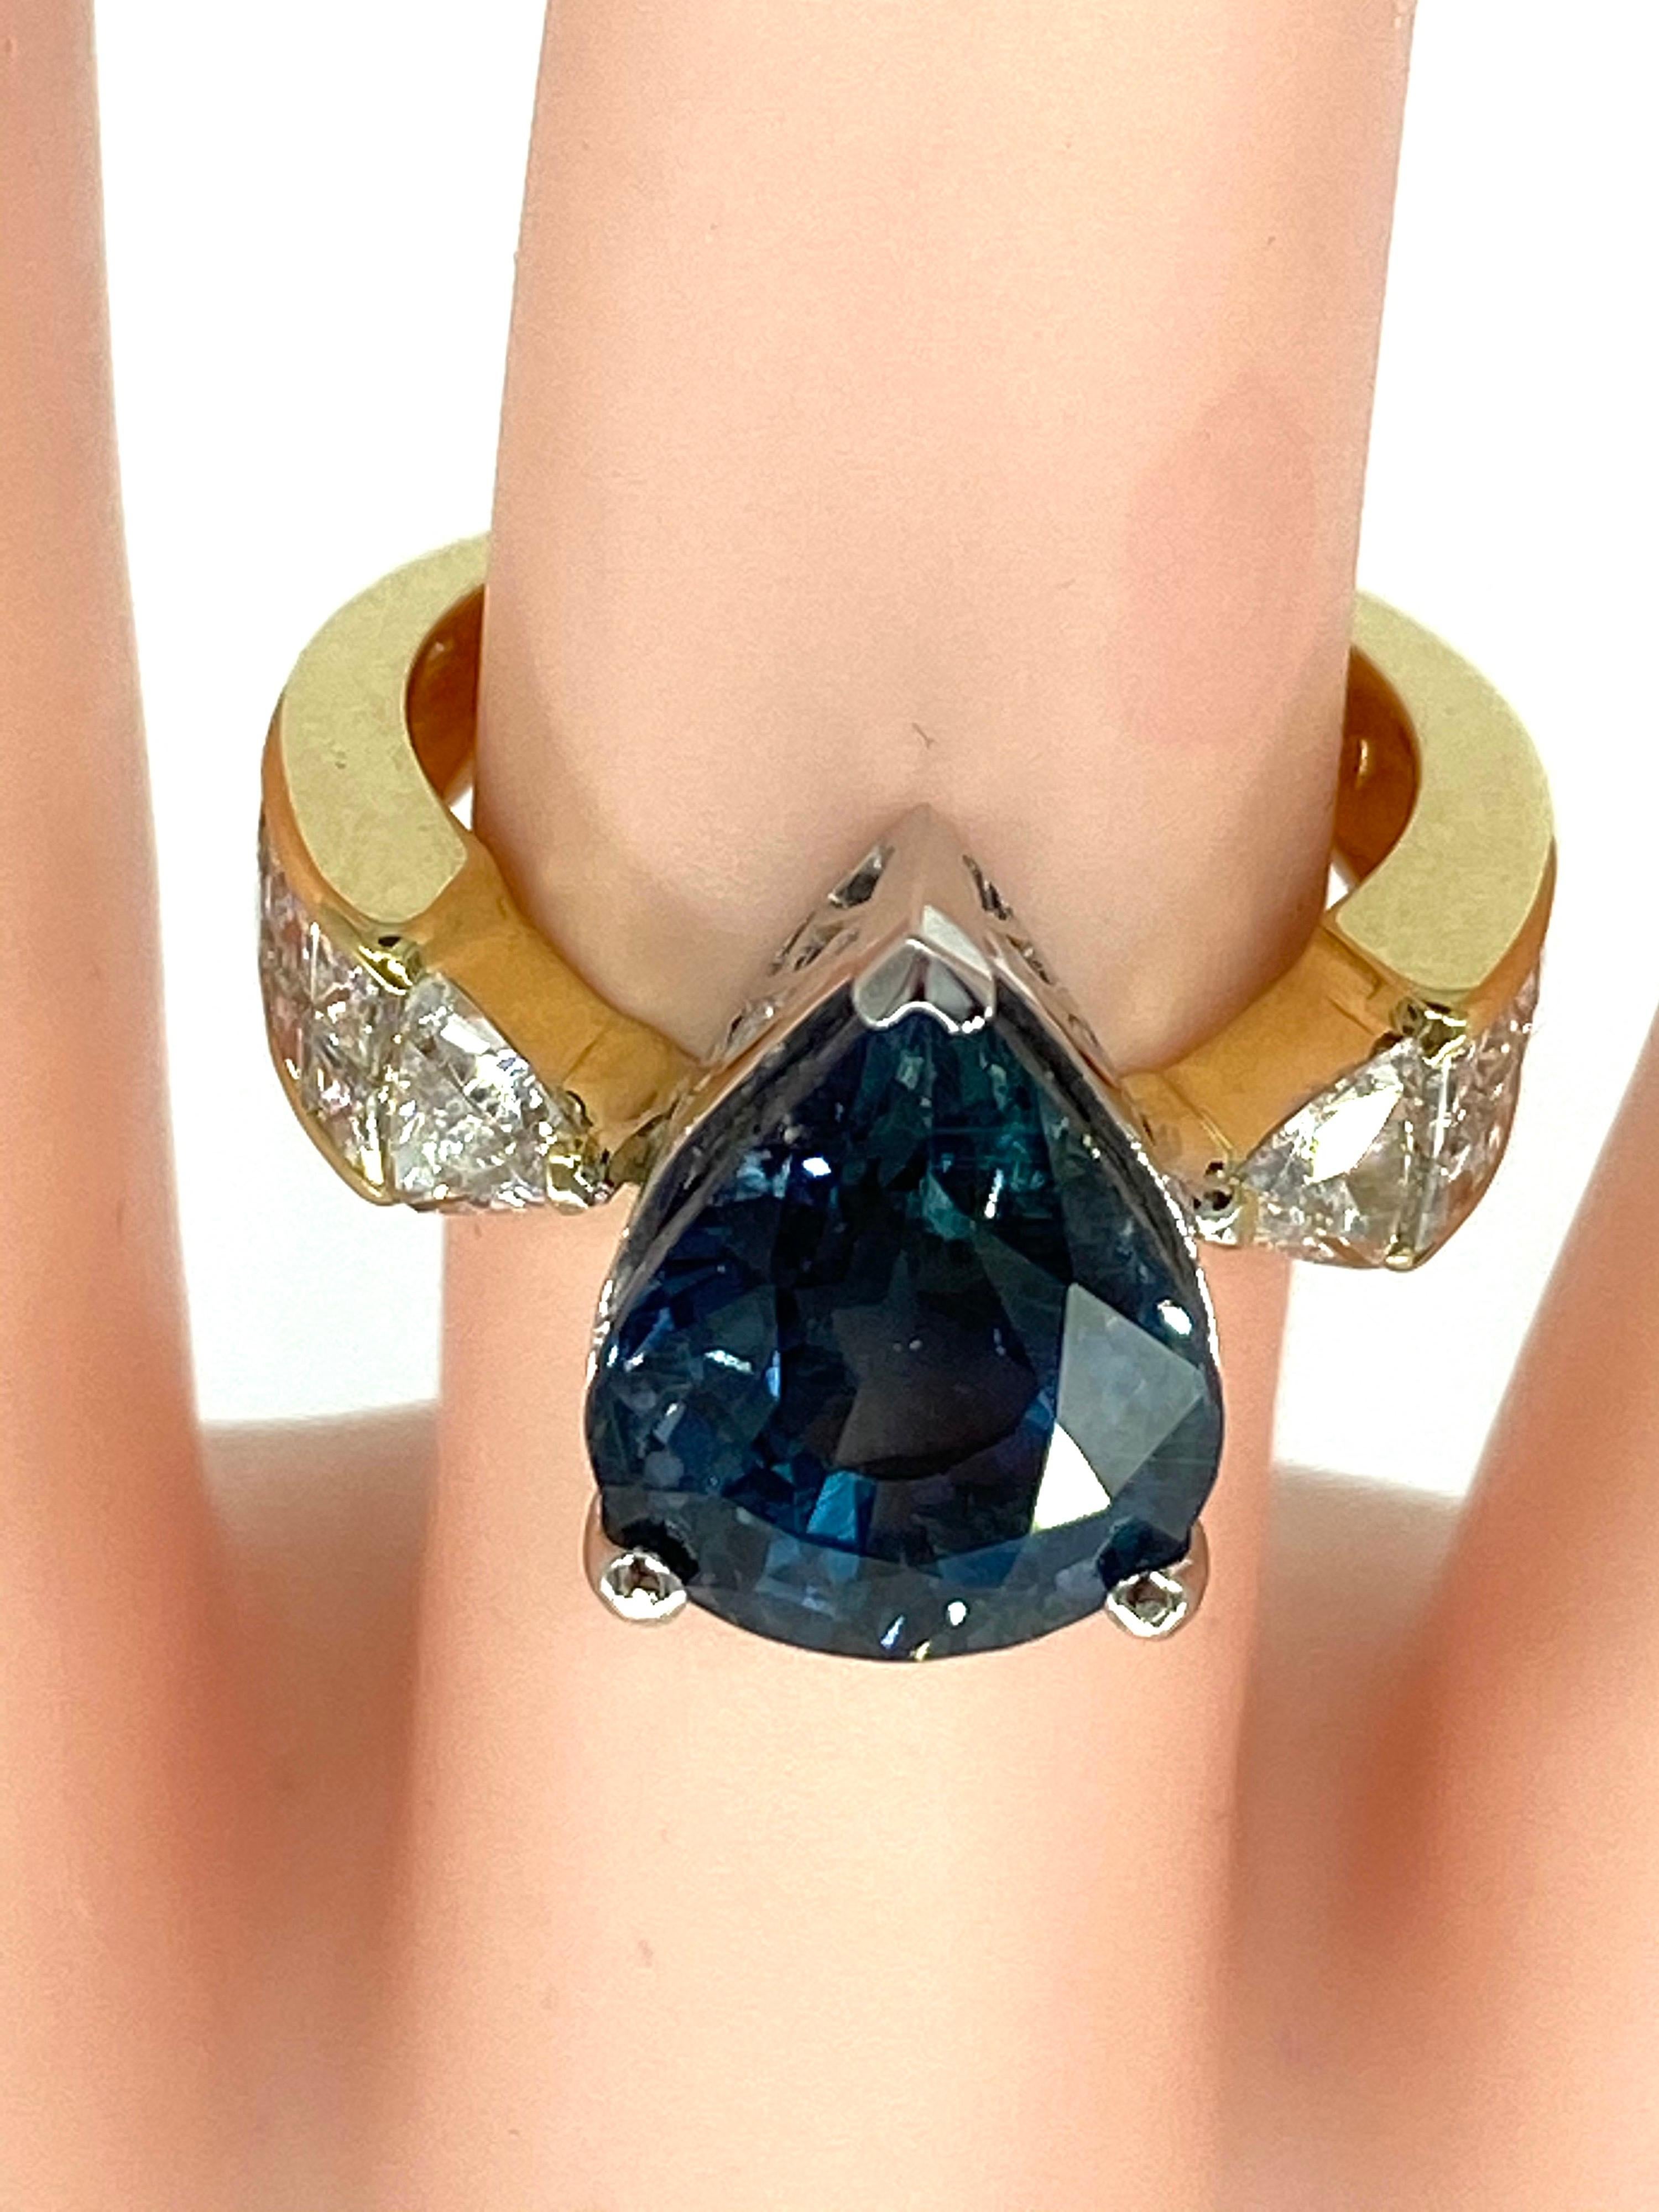 Certified 8.90 Carat Natural No Heat Blue Sapphire & Diamond Ring 18K Gold. Beautiful ring gorgeous and very sparkly. Natural blue sapphire is a rare find in this size. Comes with certificate of authenticity.

GEM CERTIFIED 
Natural Center NO HEAT